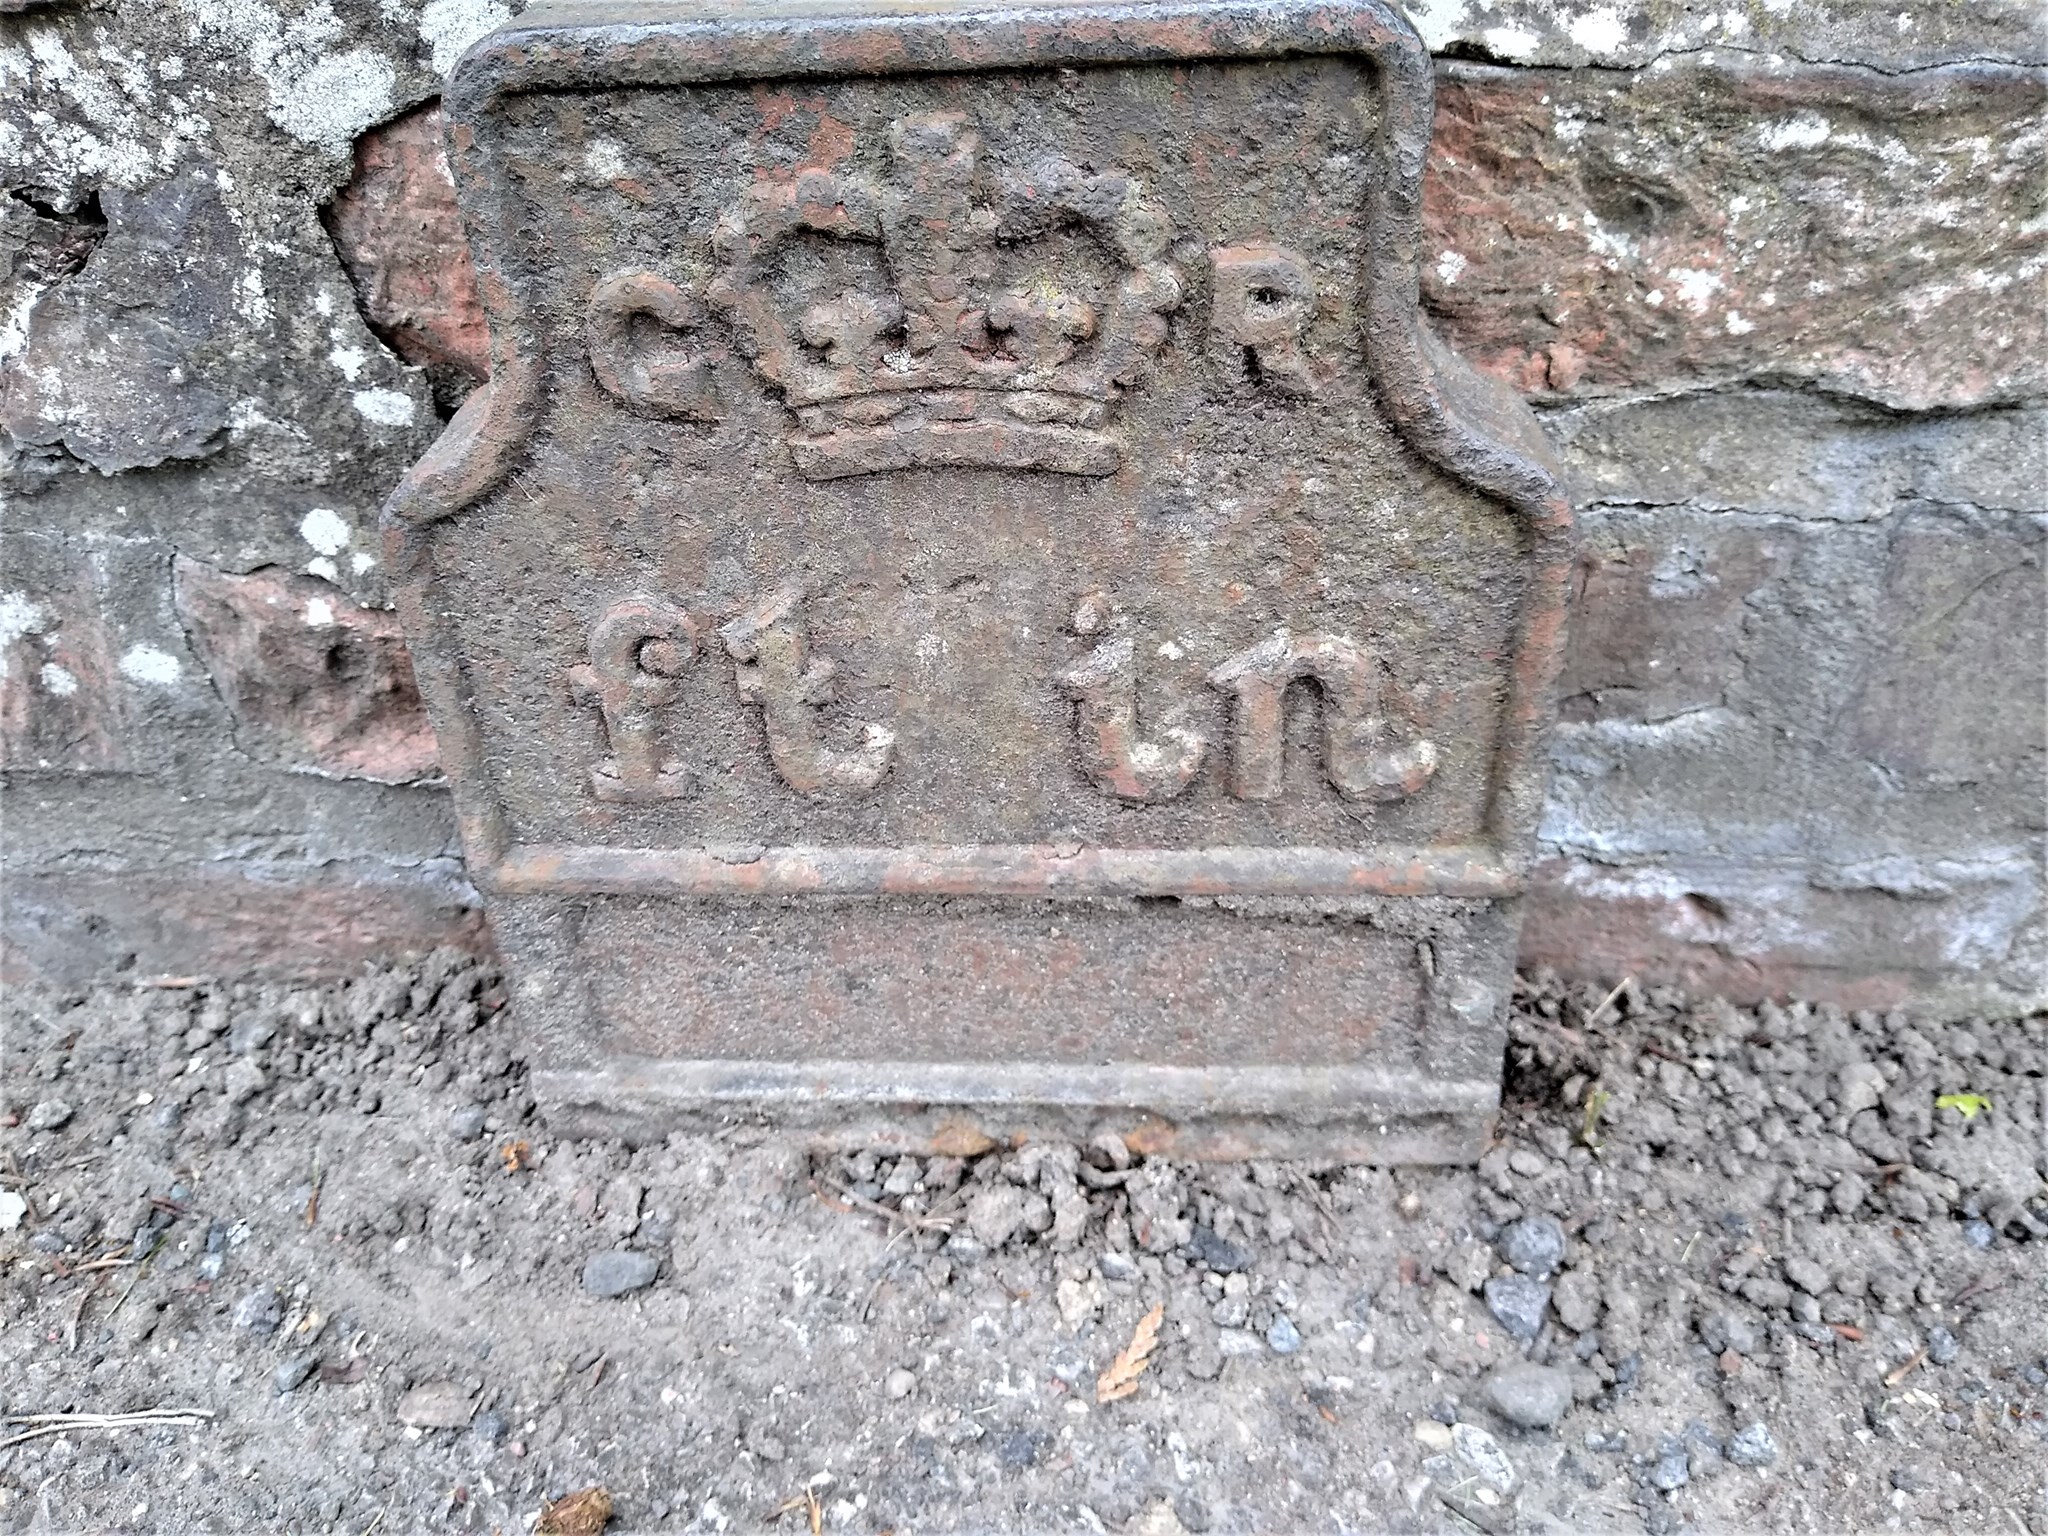 Telegraph cable marker post at 19 Tadcaster Road, Dringhouses, York by Don Boldison 